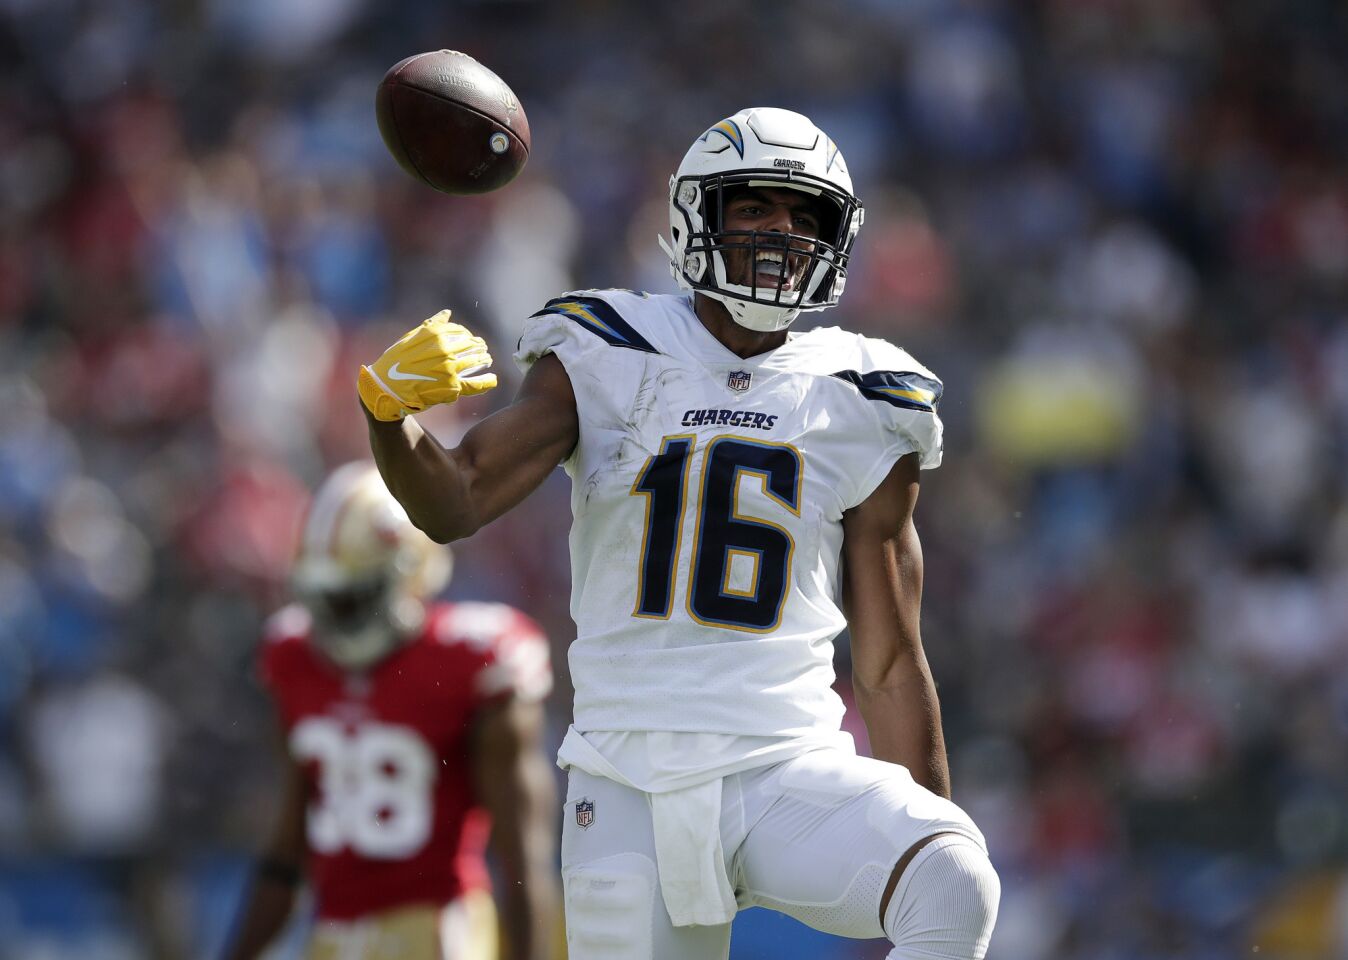 Los Angeles Chargers wide receiver Tyrell Williams, right, celebrates a catch as San Francisco 49ers defensive back Antone Exum stands in the background during the second half of an NFL football game, Sunday, Sept. 30, 2018, in Carson, Calif.